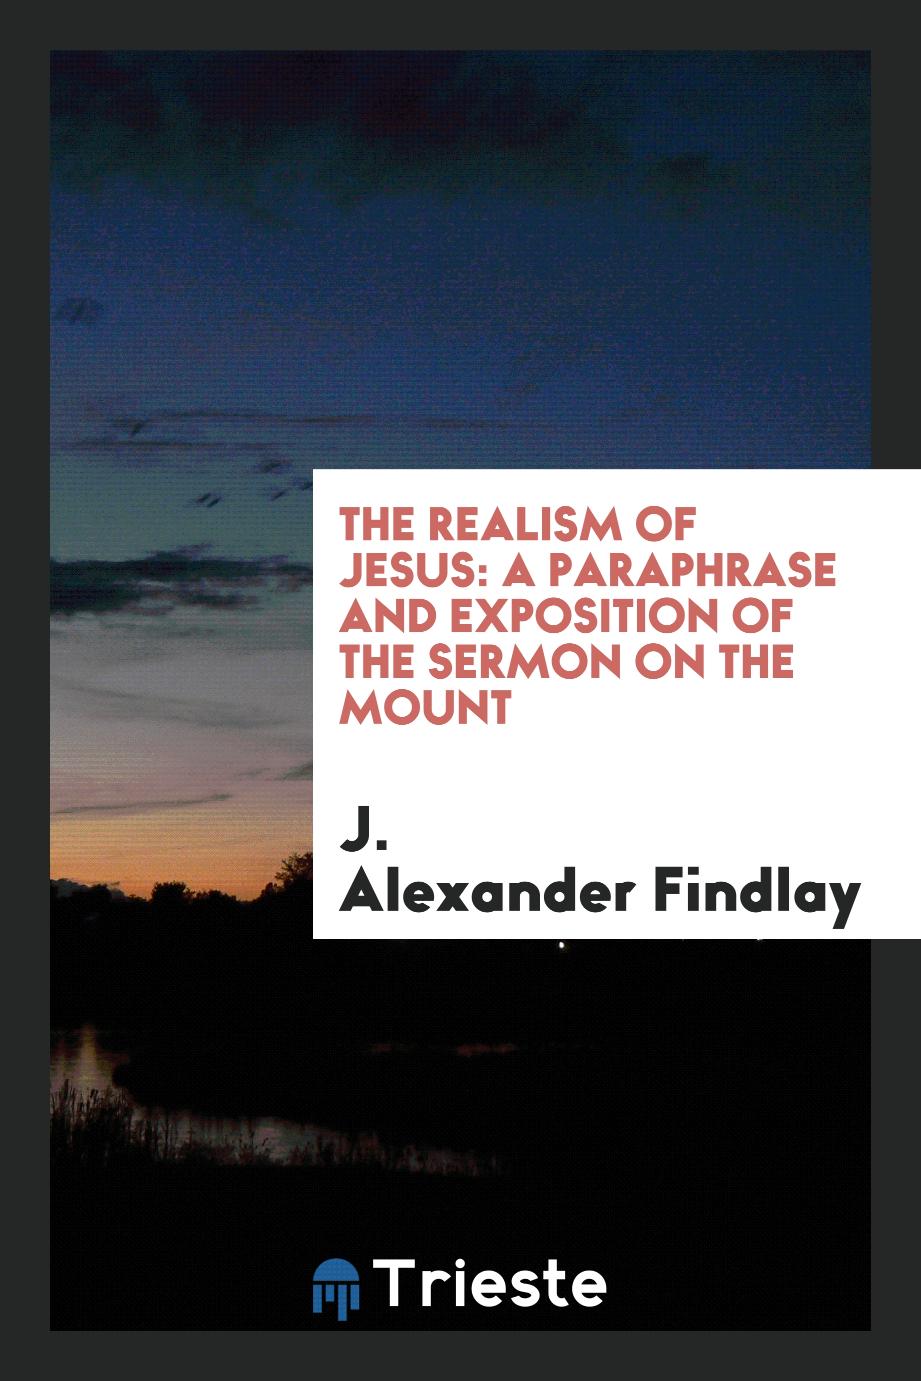 The realism of Jesus: a paraphrase and exposition of the Sermon on the Mount